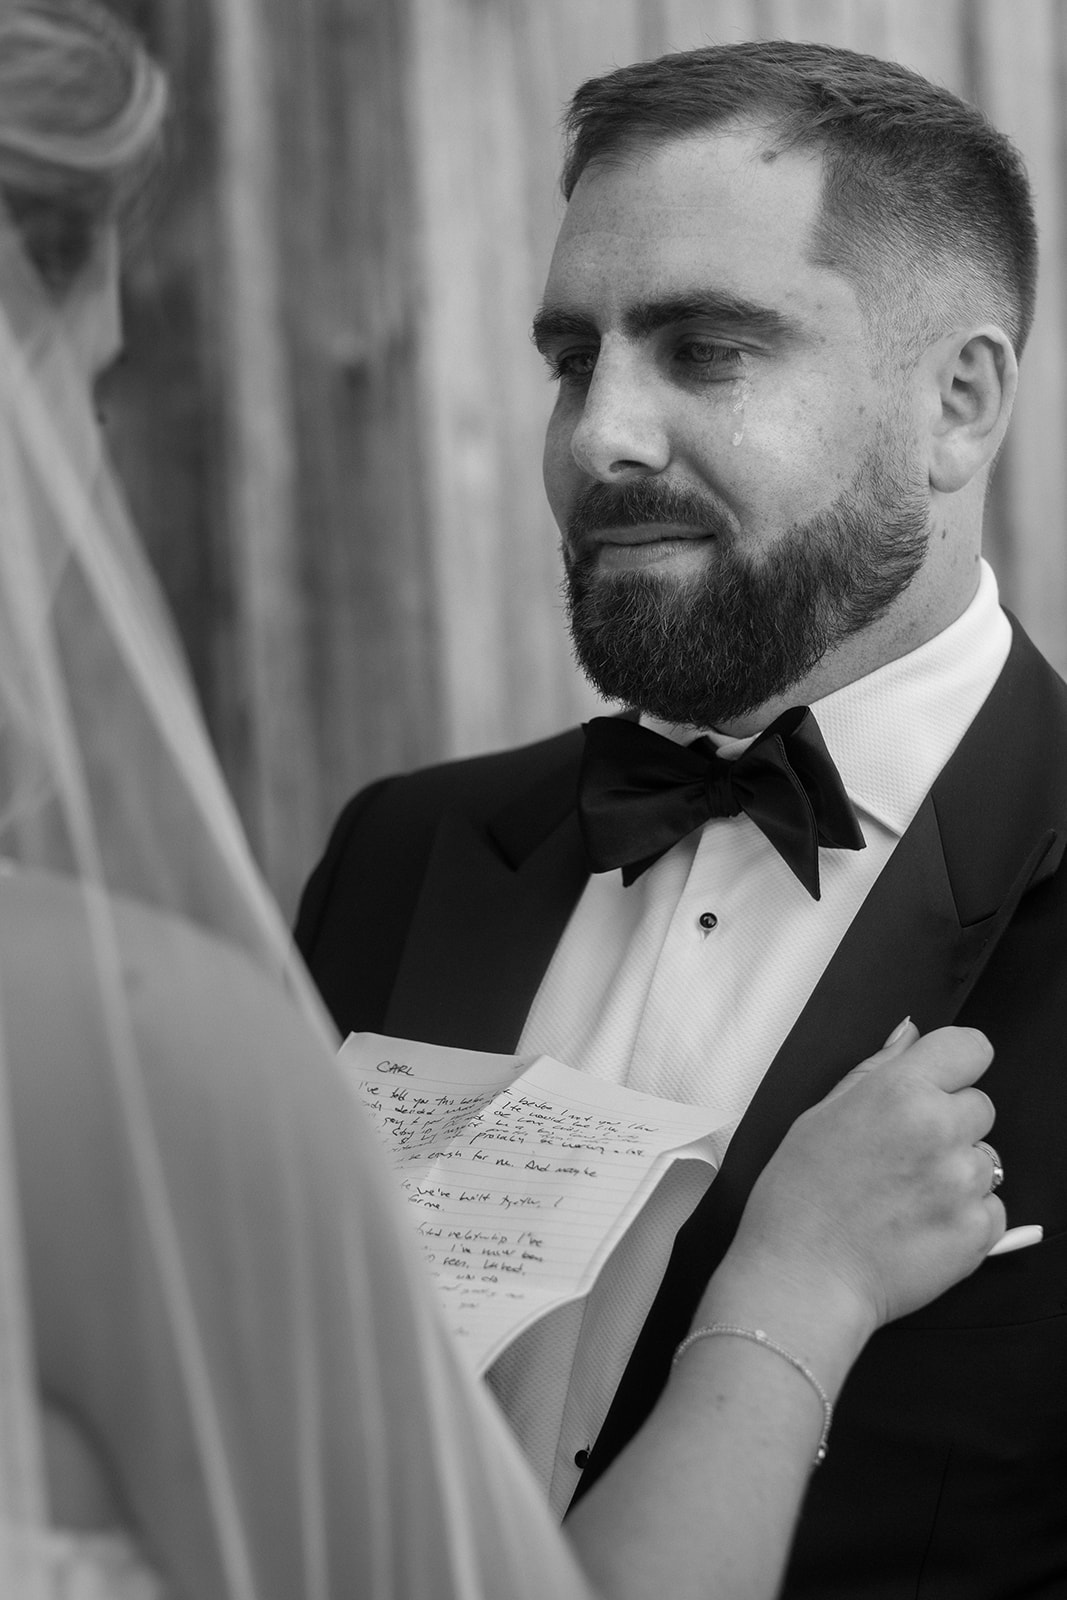 Groom cries while his bride reads private vows at Virginia barn wedding